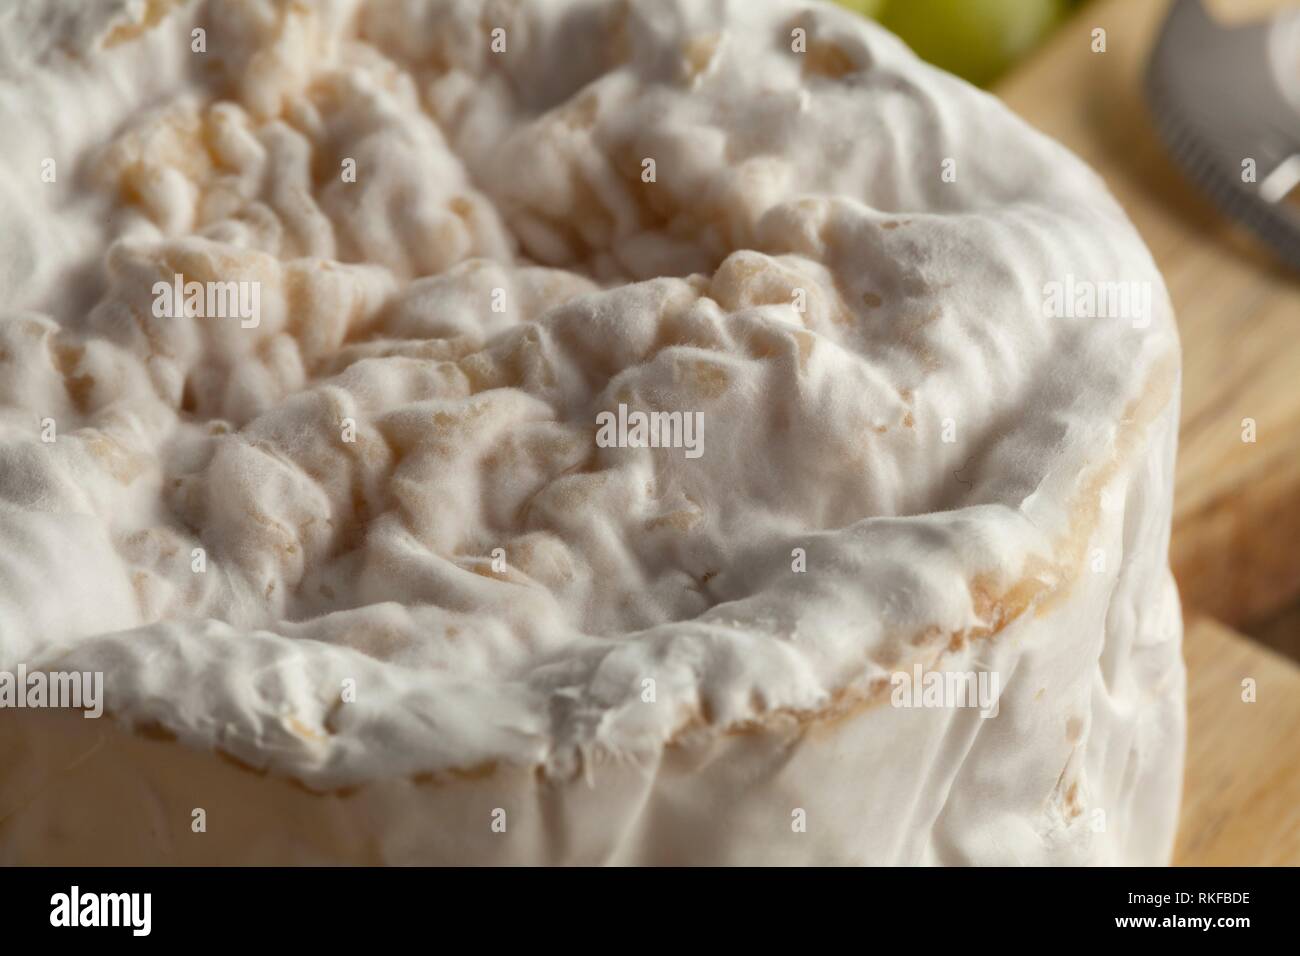 Small camembert cheese close up on a cheese board. Stock Photo